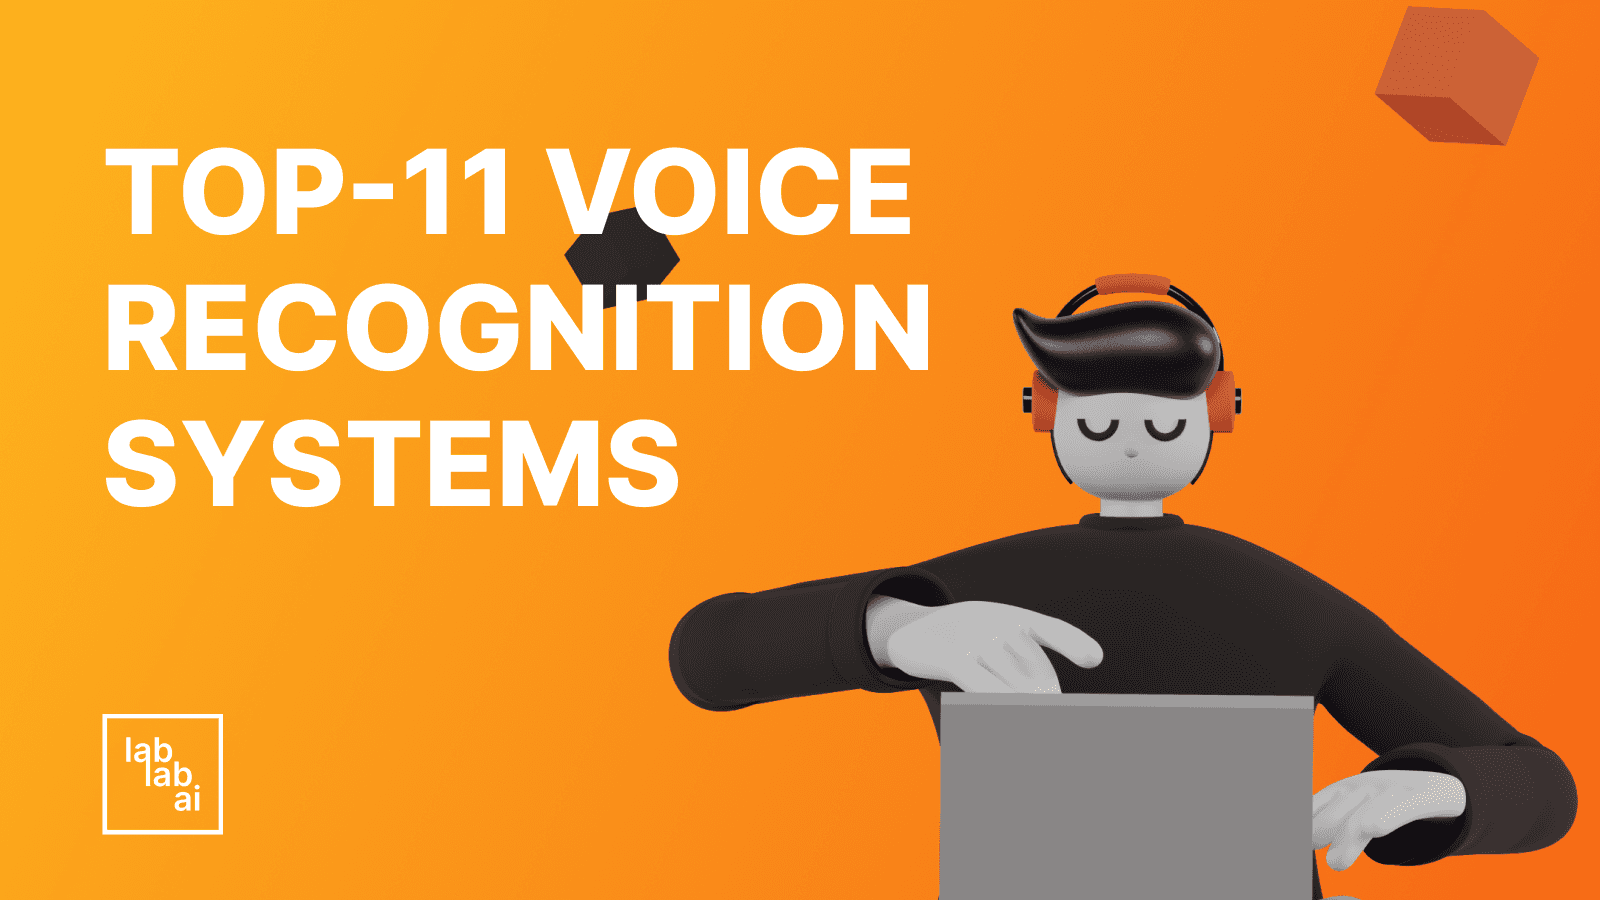 Top 11 Voice Recognition Systems Thumbnail Image